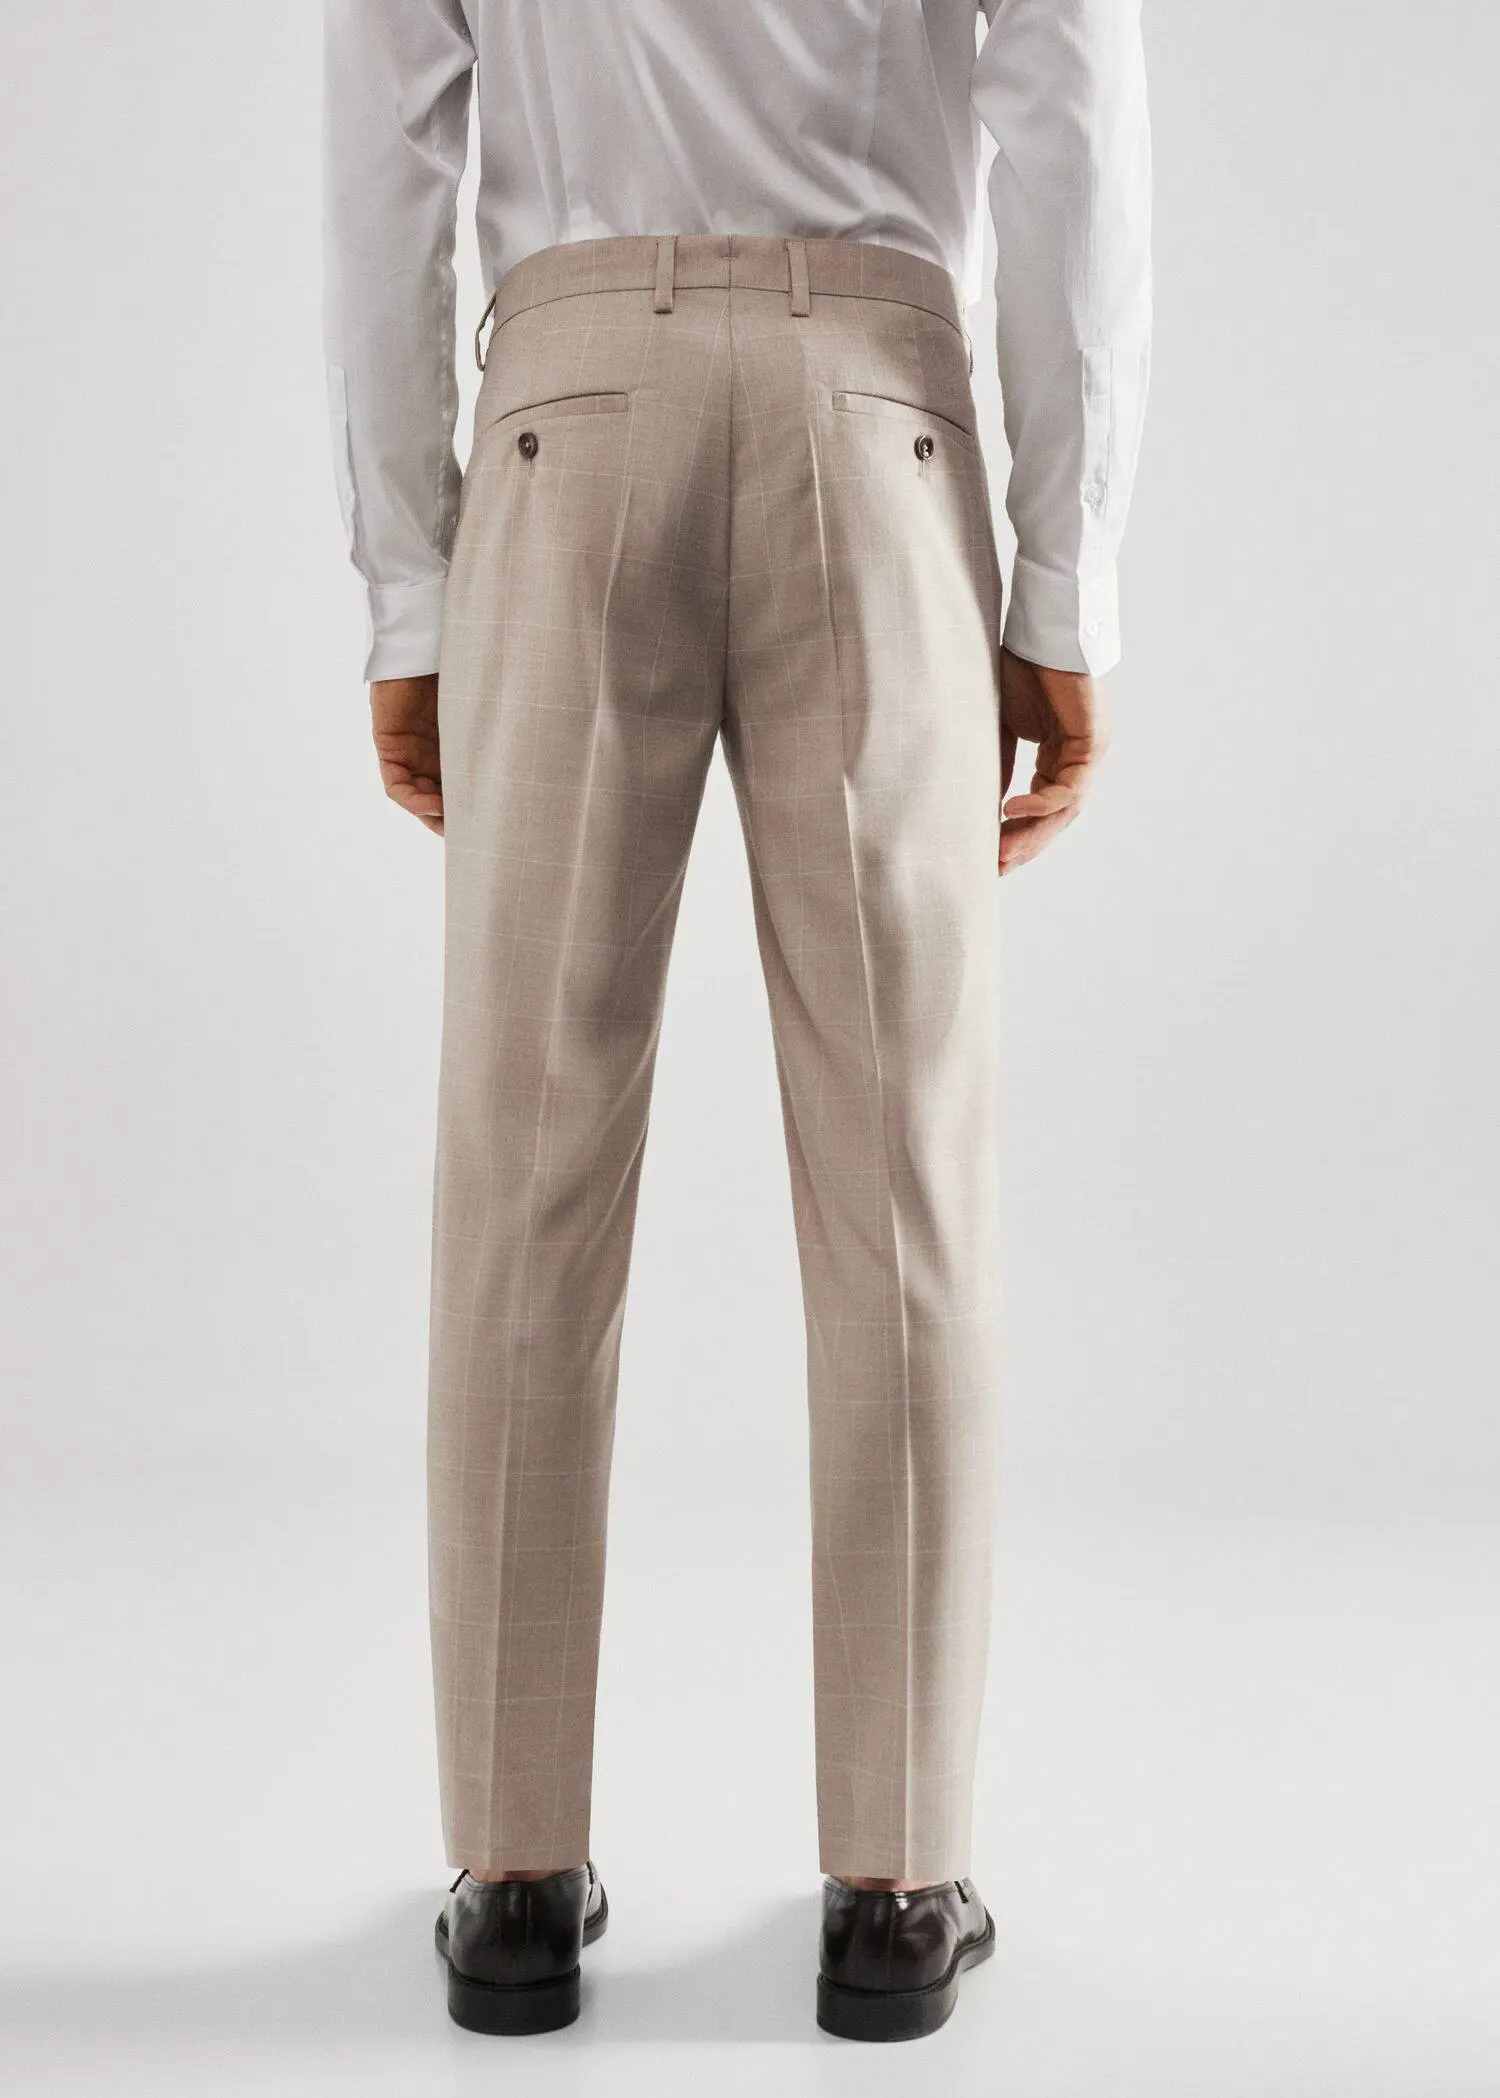 Mango Super slim-fit Tailored check trousers. a man wearing a suit and tie standing in front of a white wall. 